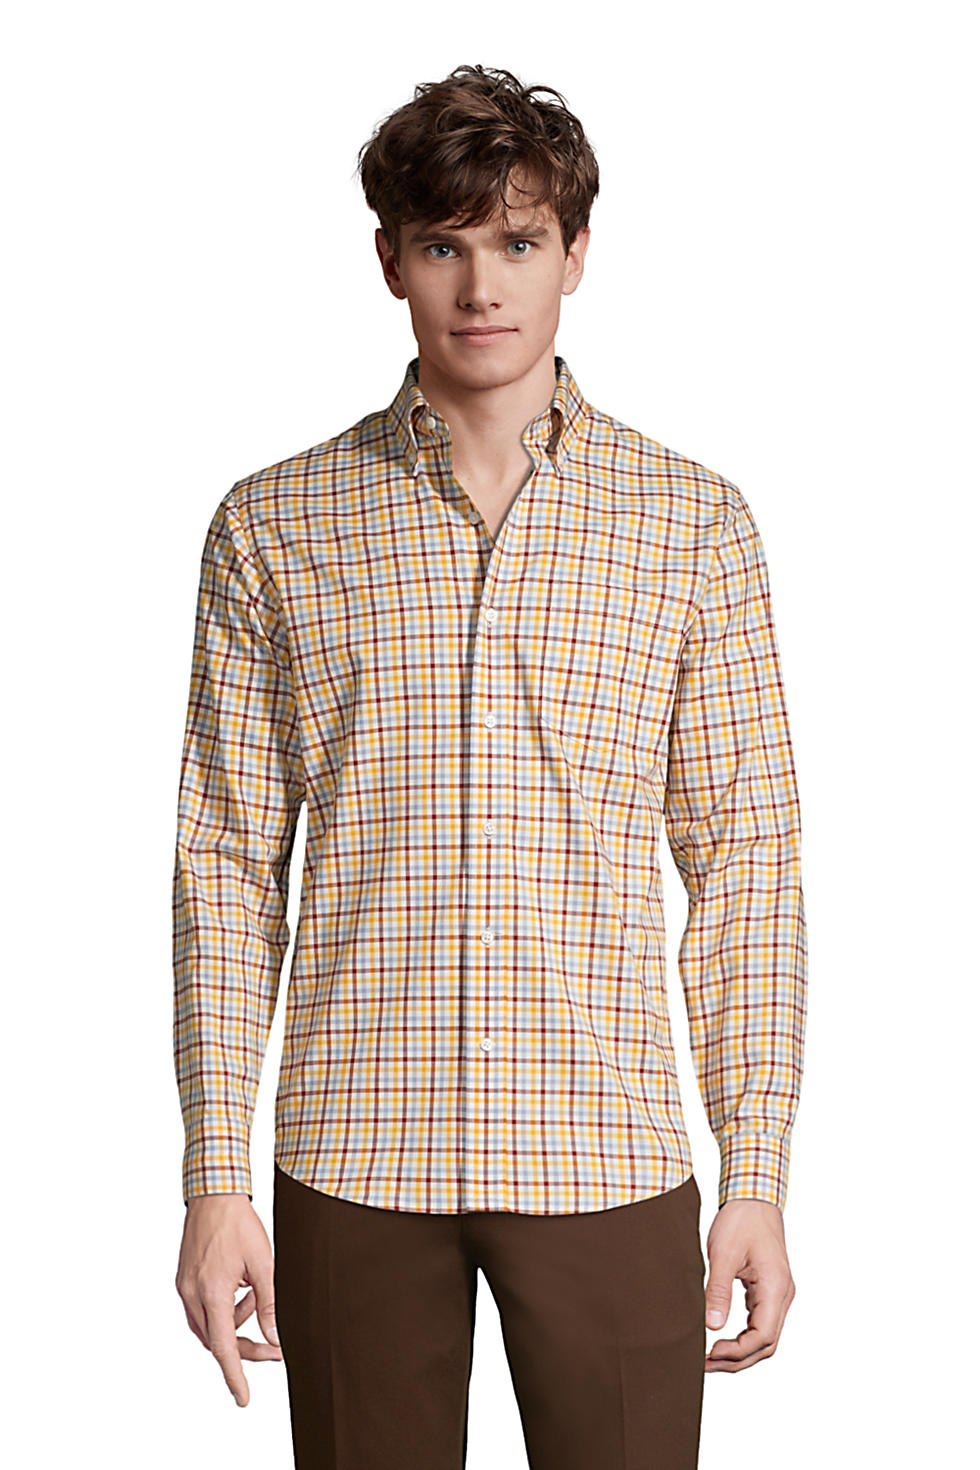 Lands End Men's Traditional Fit No Iron Twill Shirt (Ivory Multi Check)